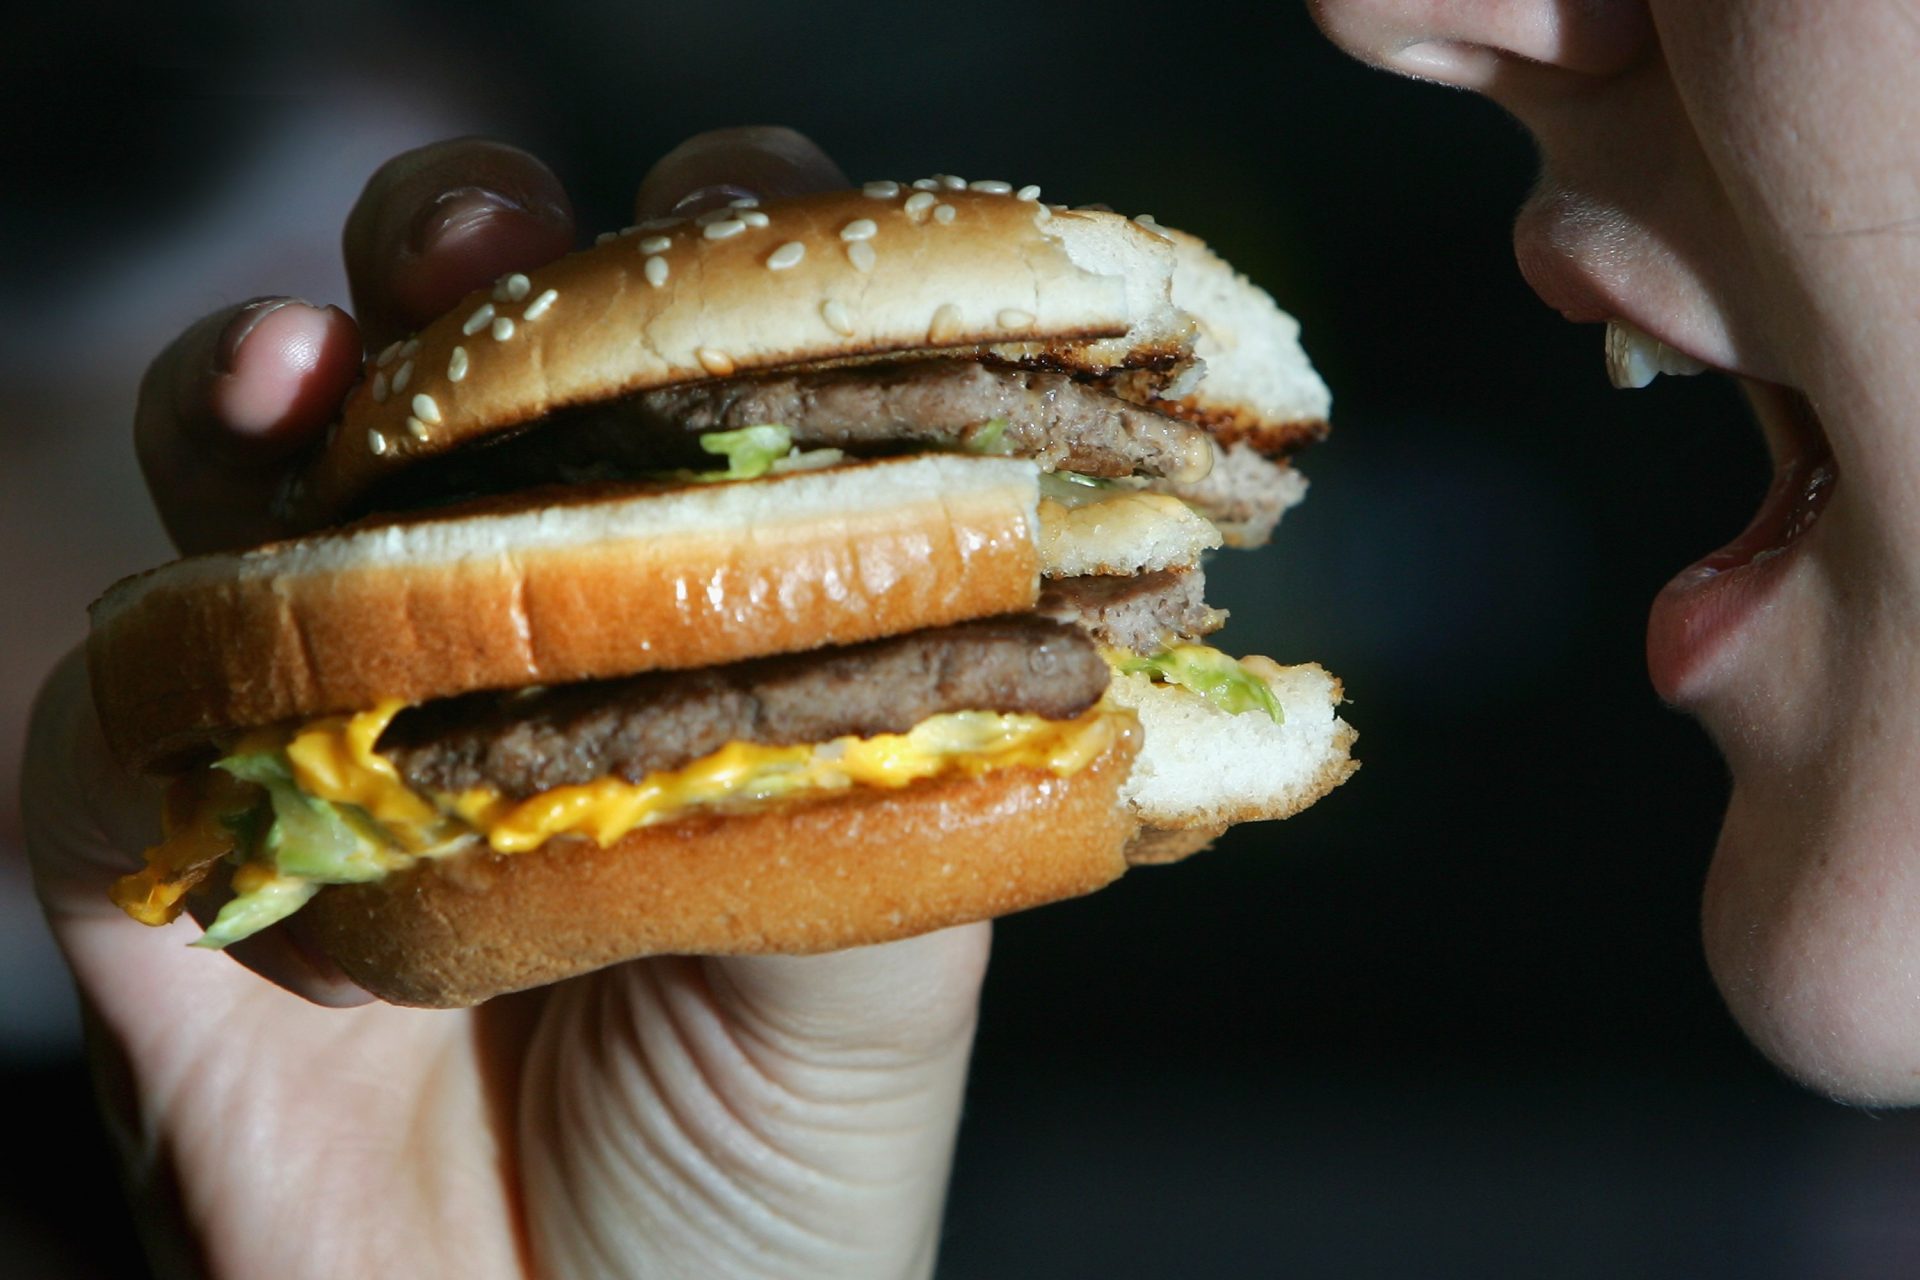 The Big Mac index: What it costs to buy a burger around the world